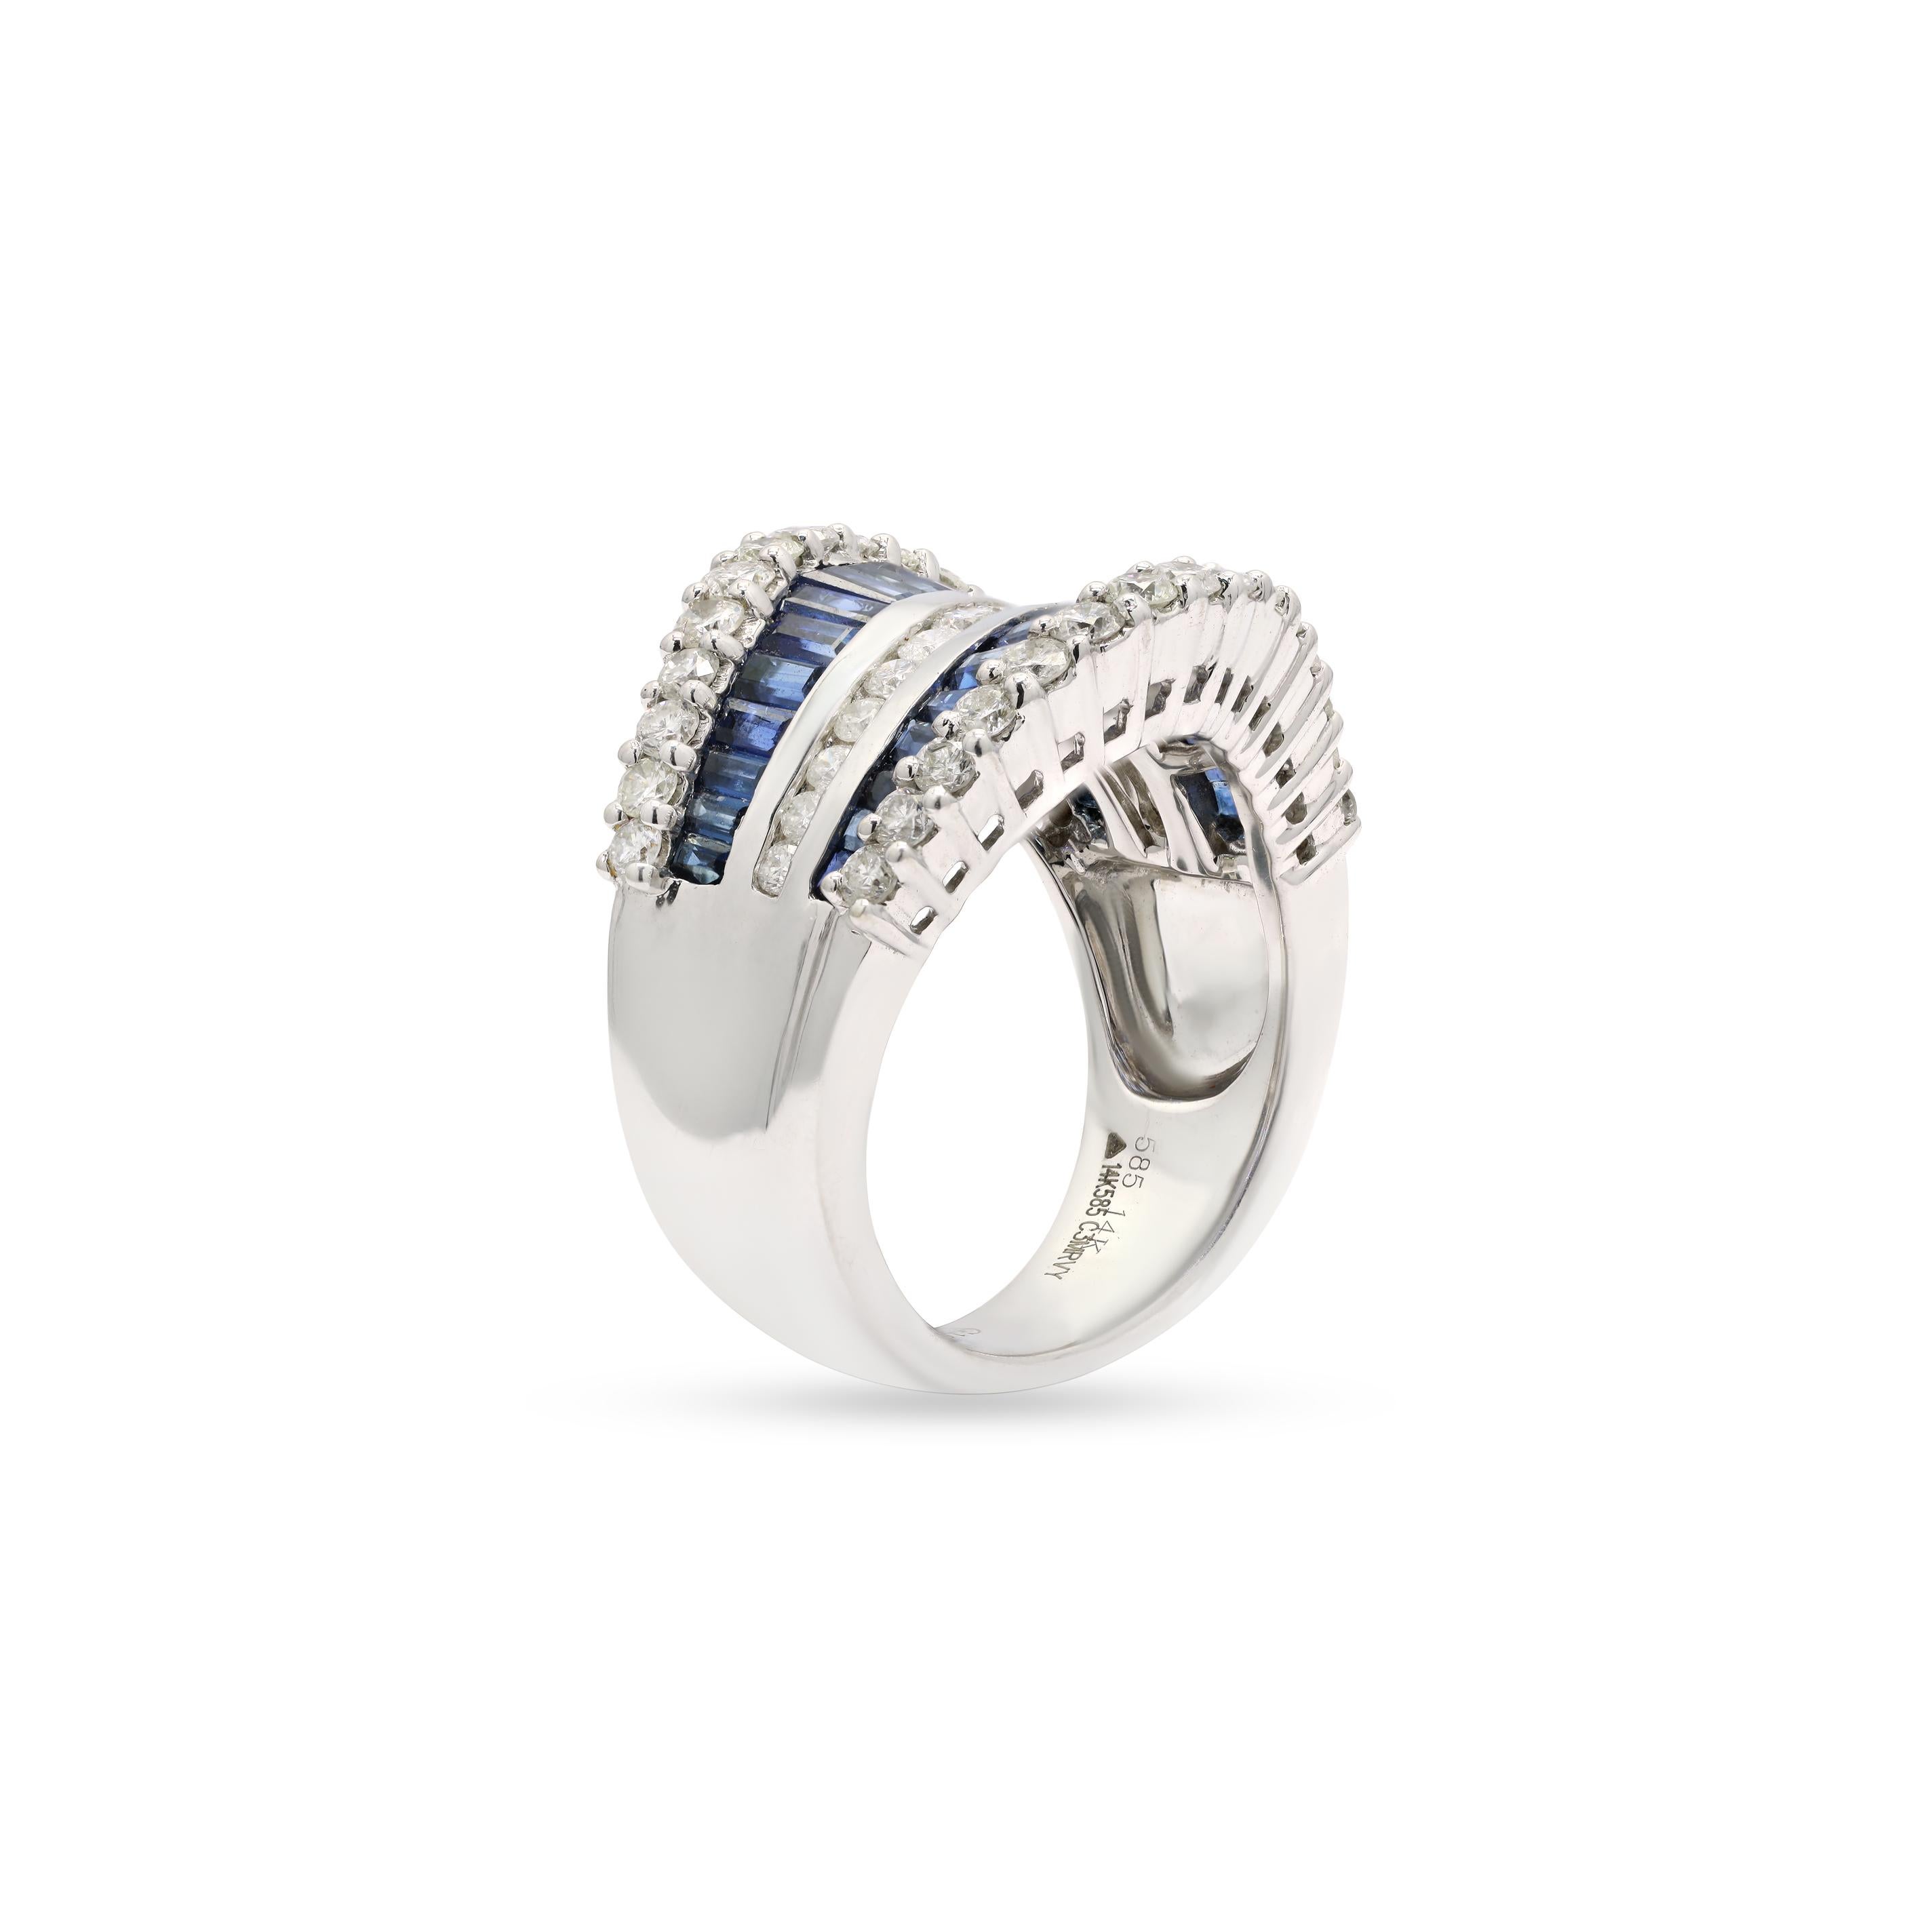 For Sale:  2.65 Carat Blue Sapphire and Diamond Cocktail Ring in 14 Karat White Gold 4